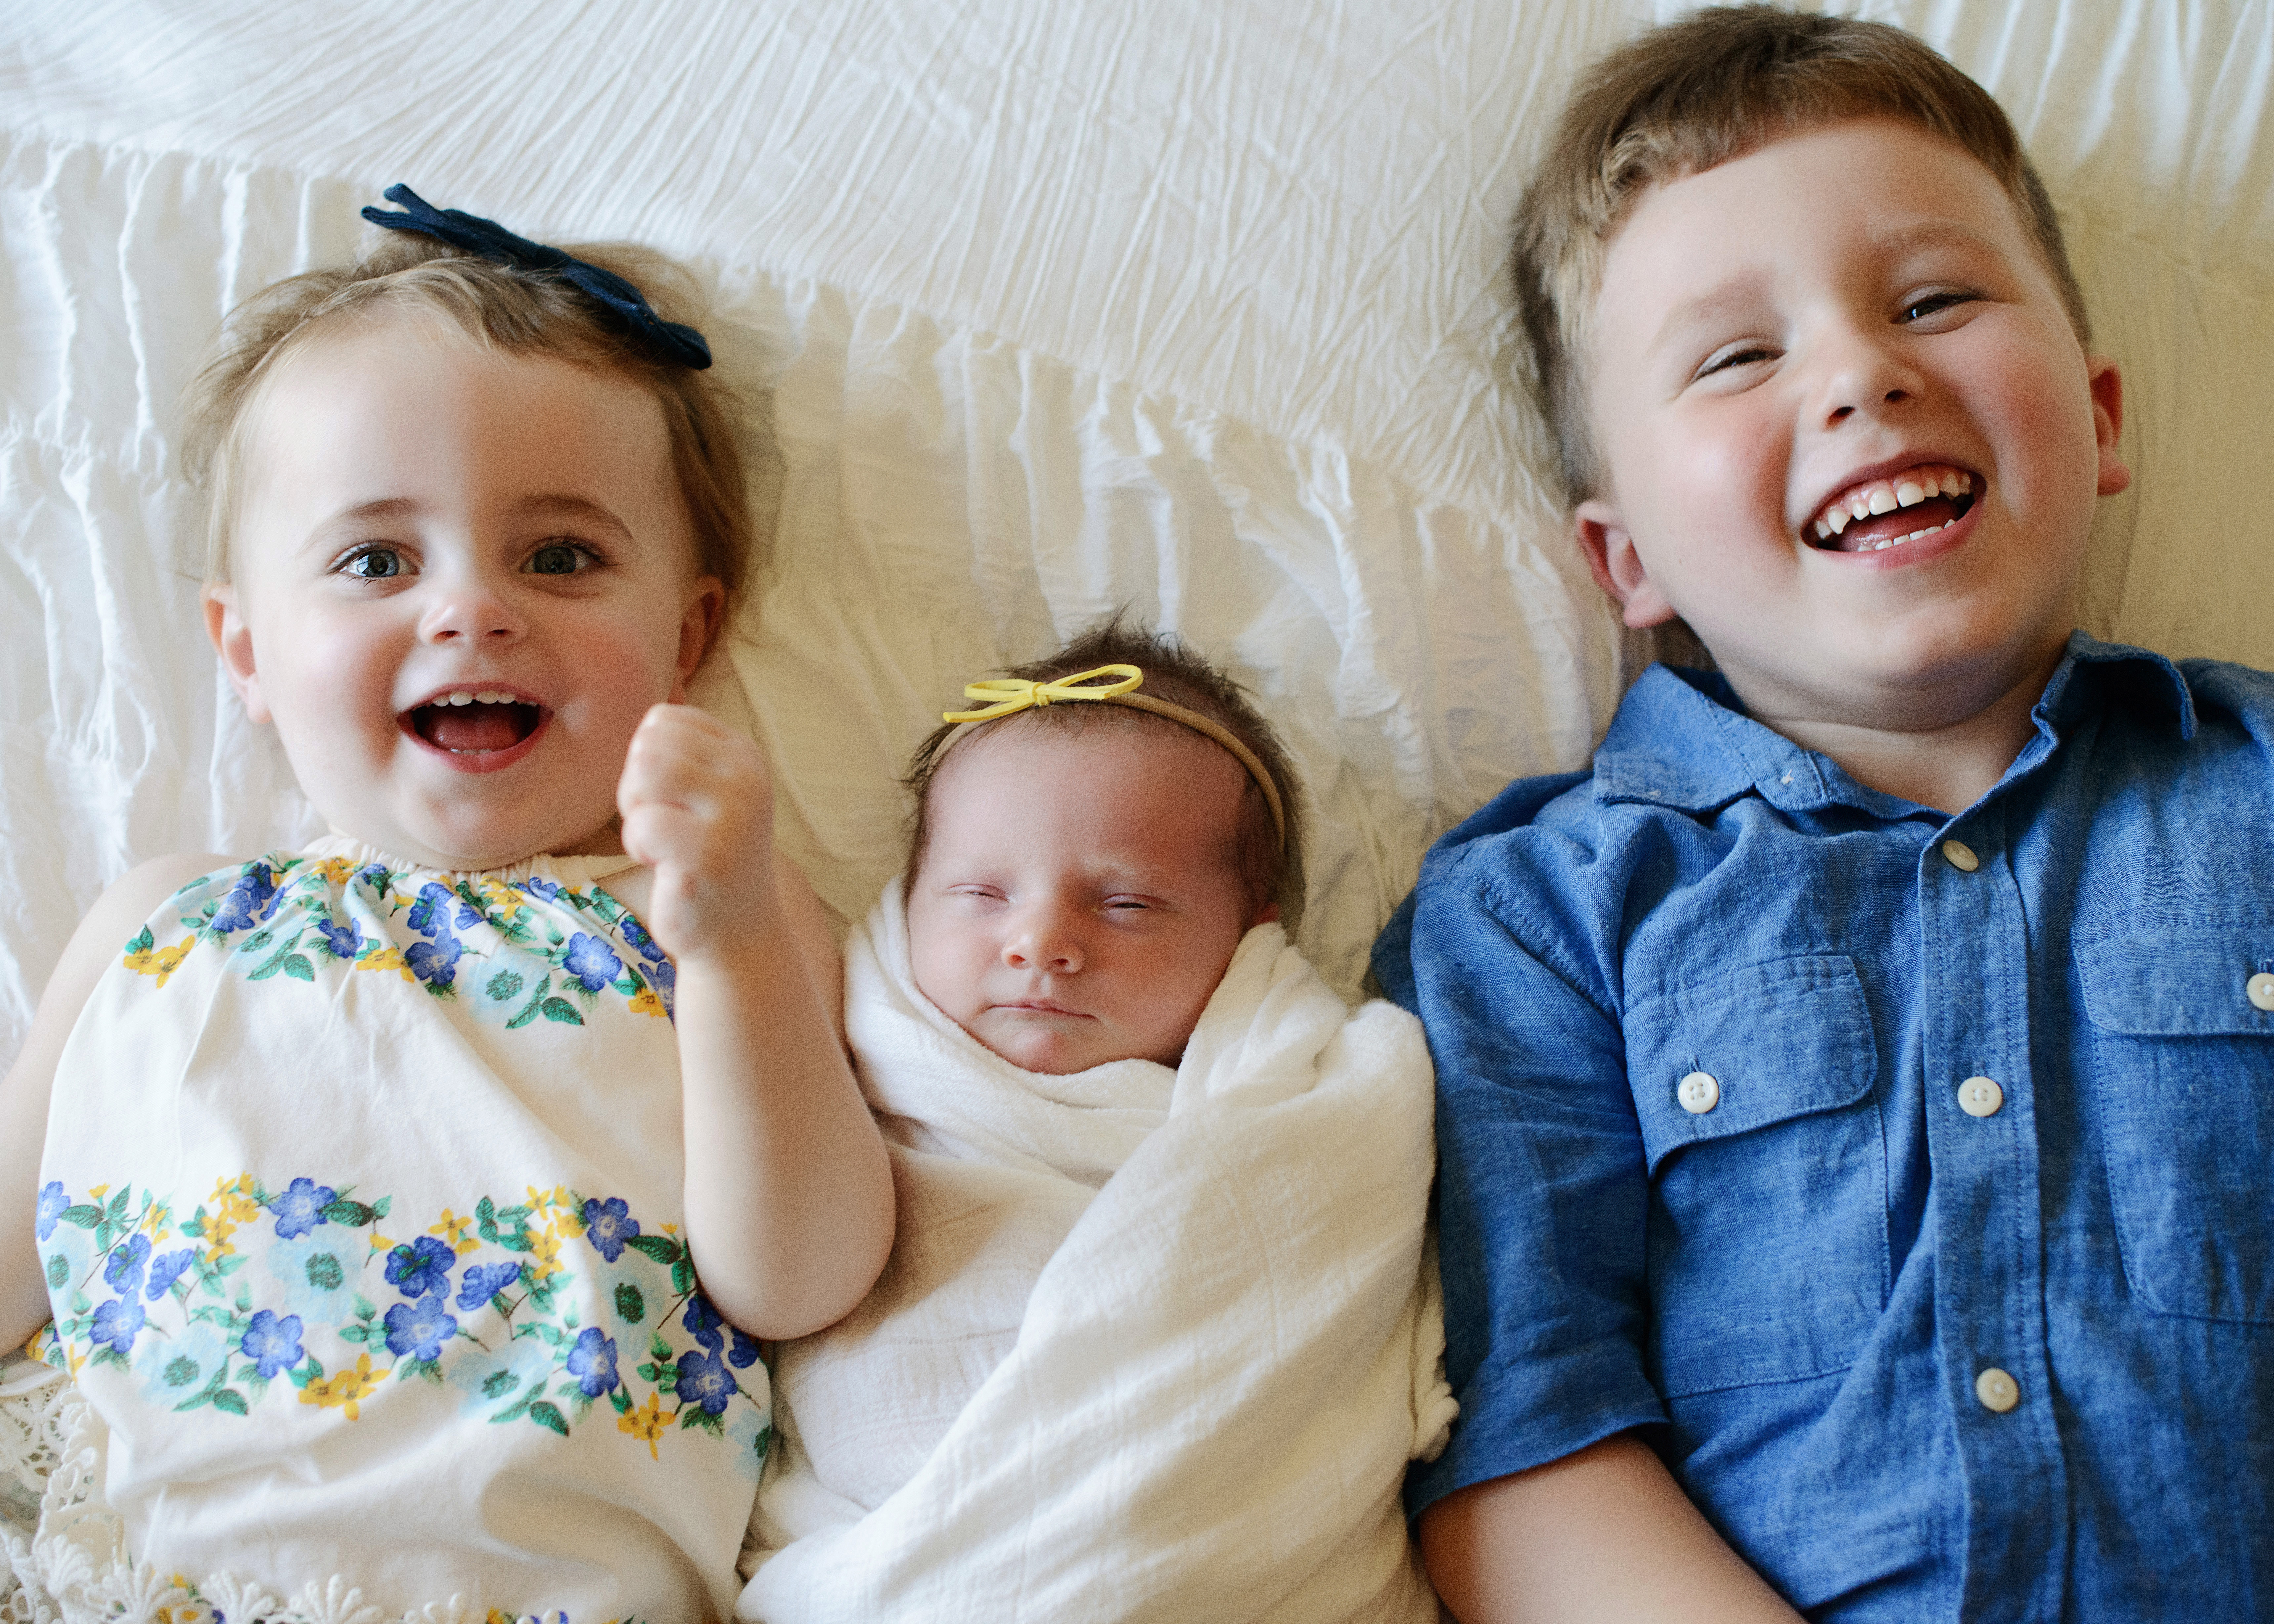 Big sister and brother smile directly into camera as newborn baby sleeps in between them on bed